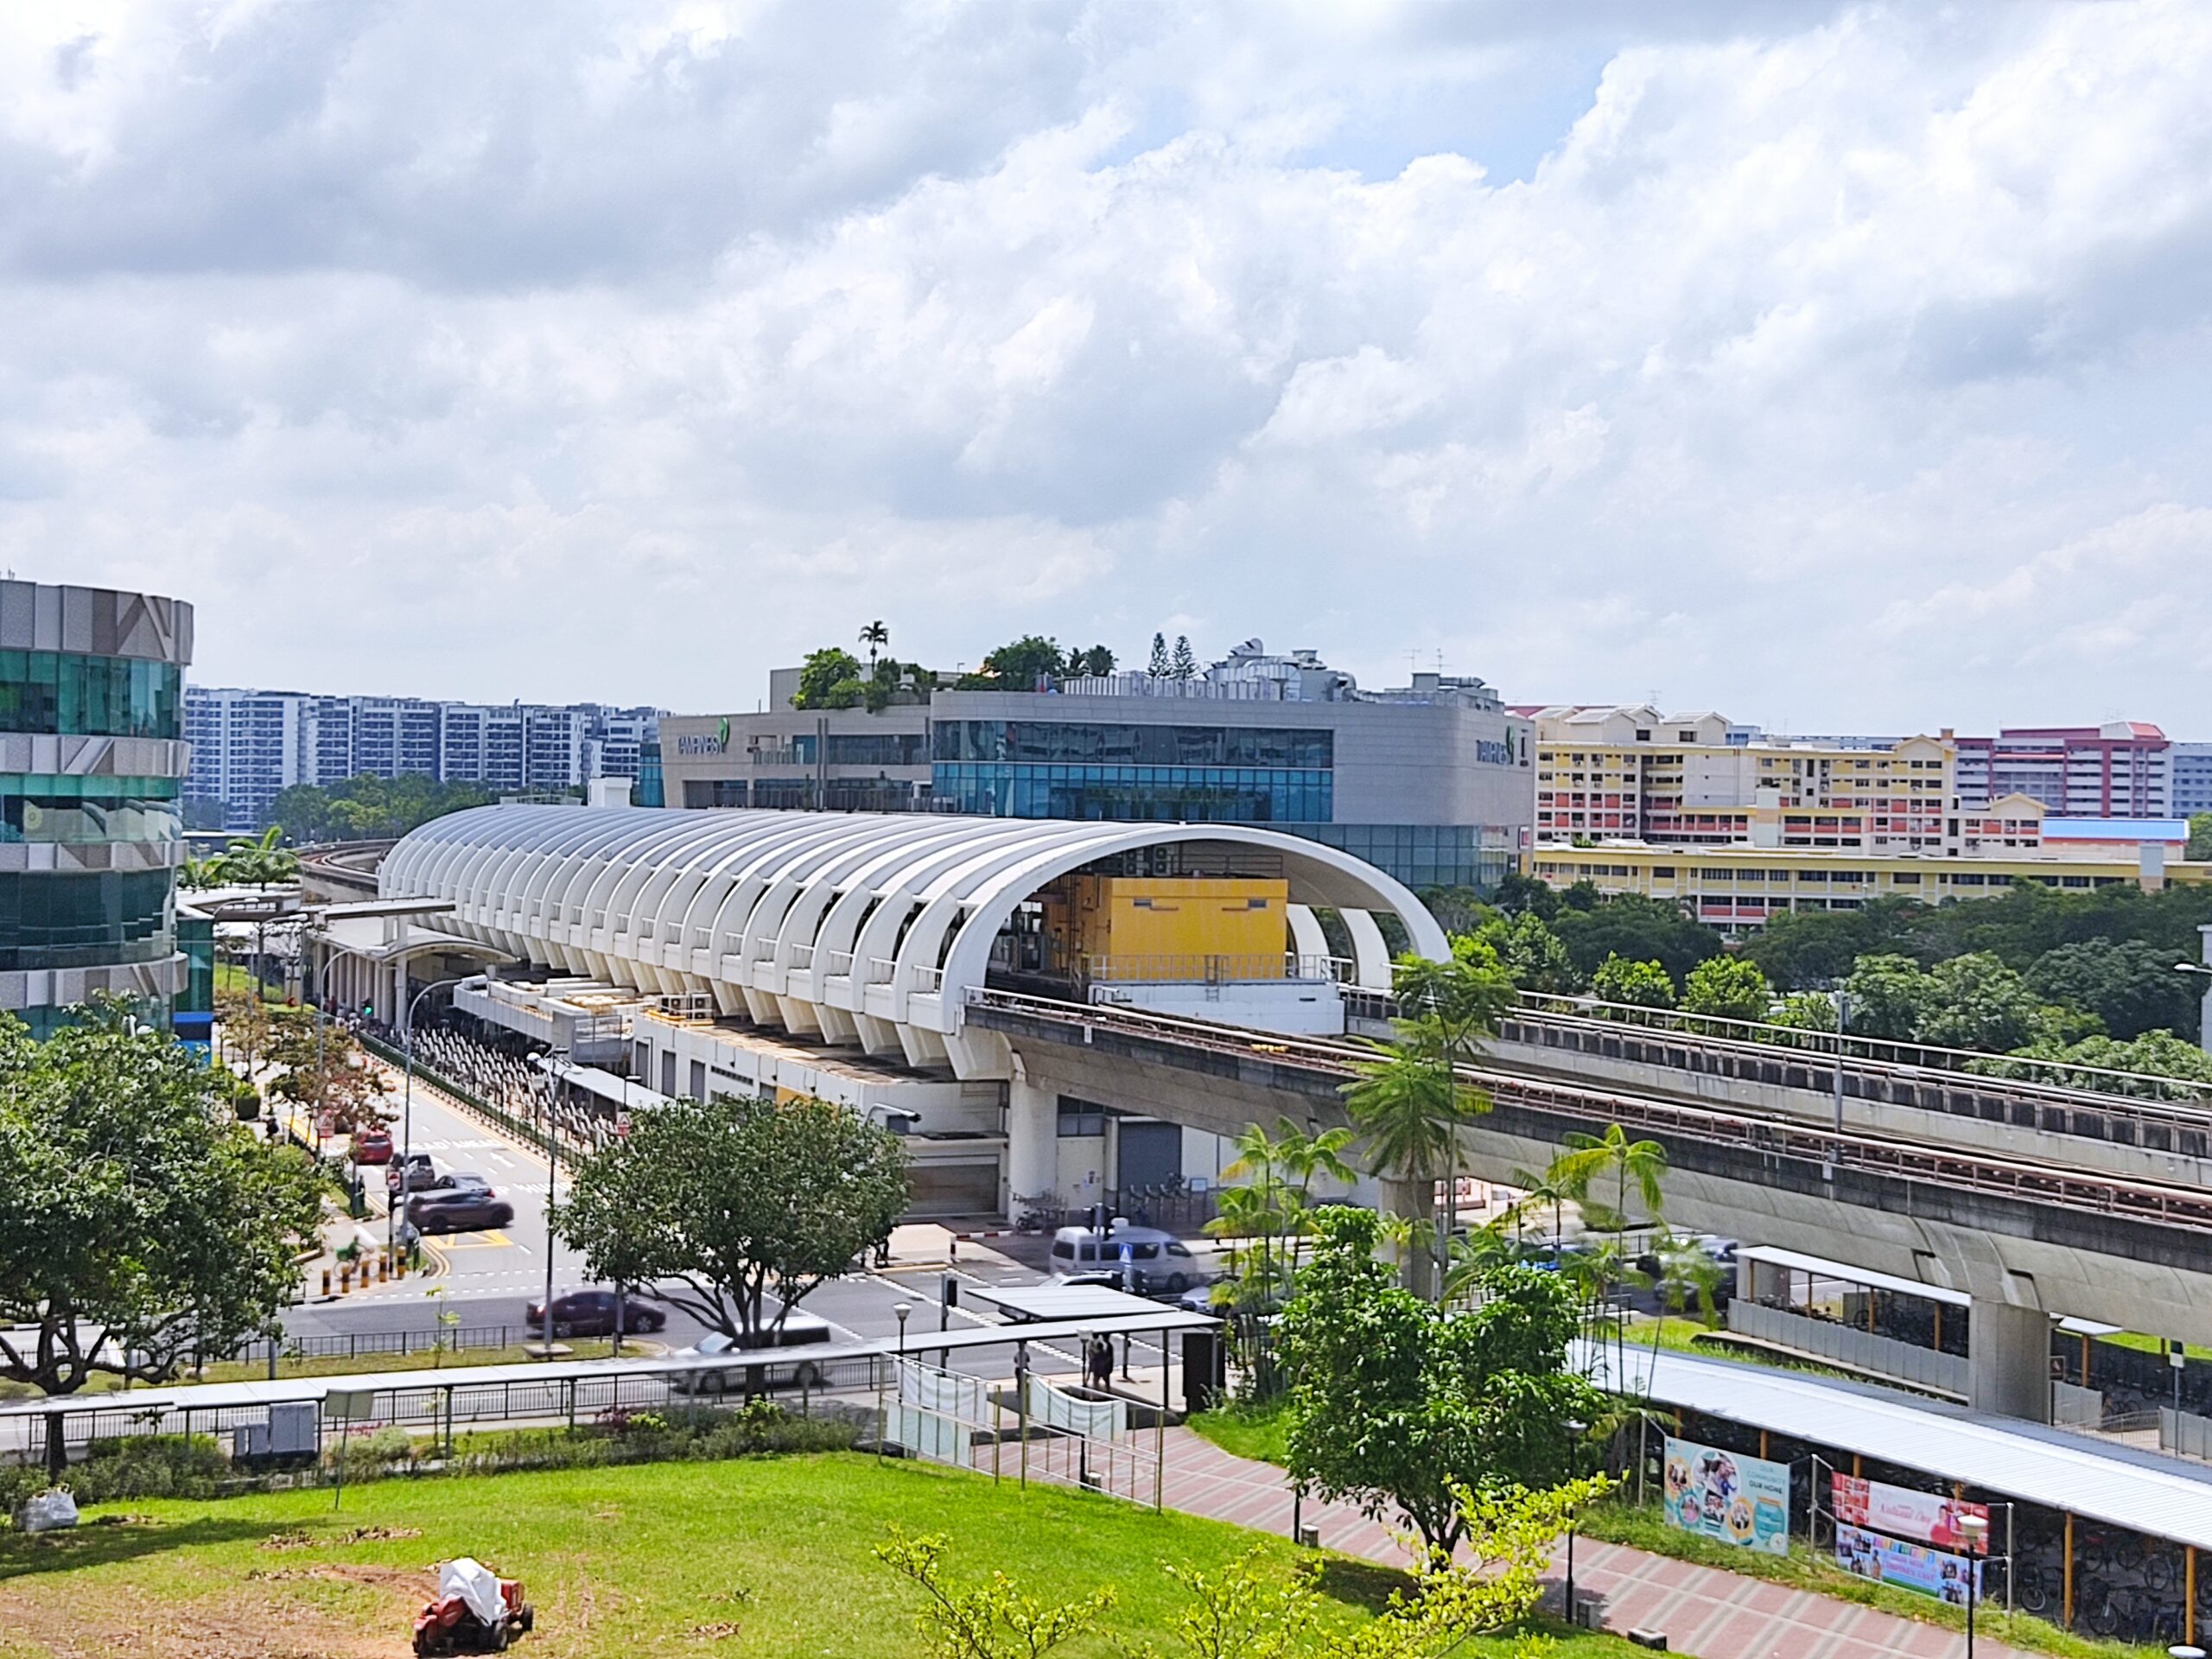 A daytime shot of Tampines MRT Station, Tampines1 Shopping Mall and the area around it